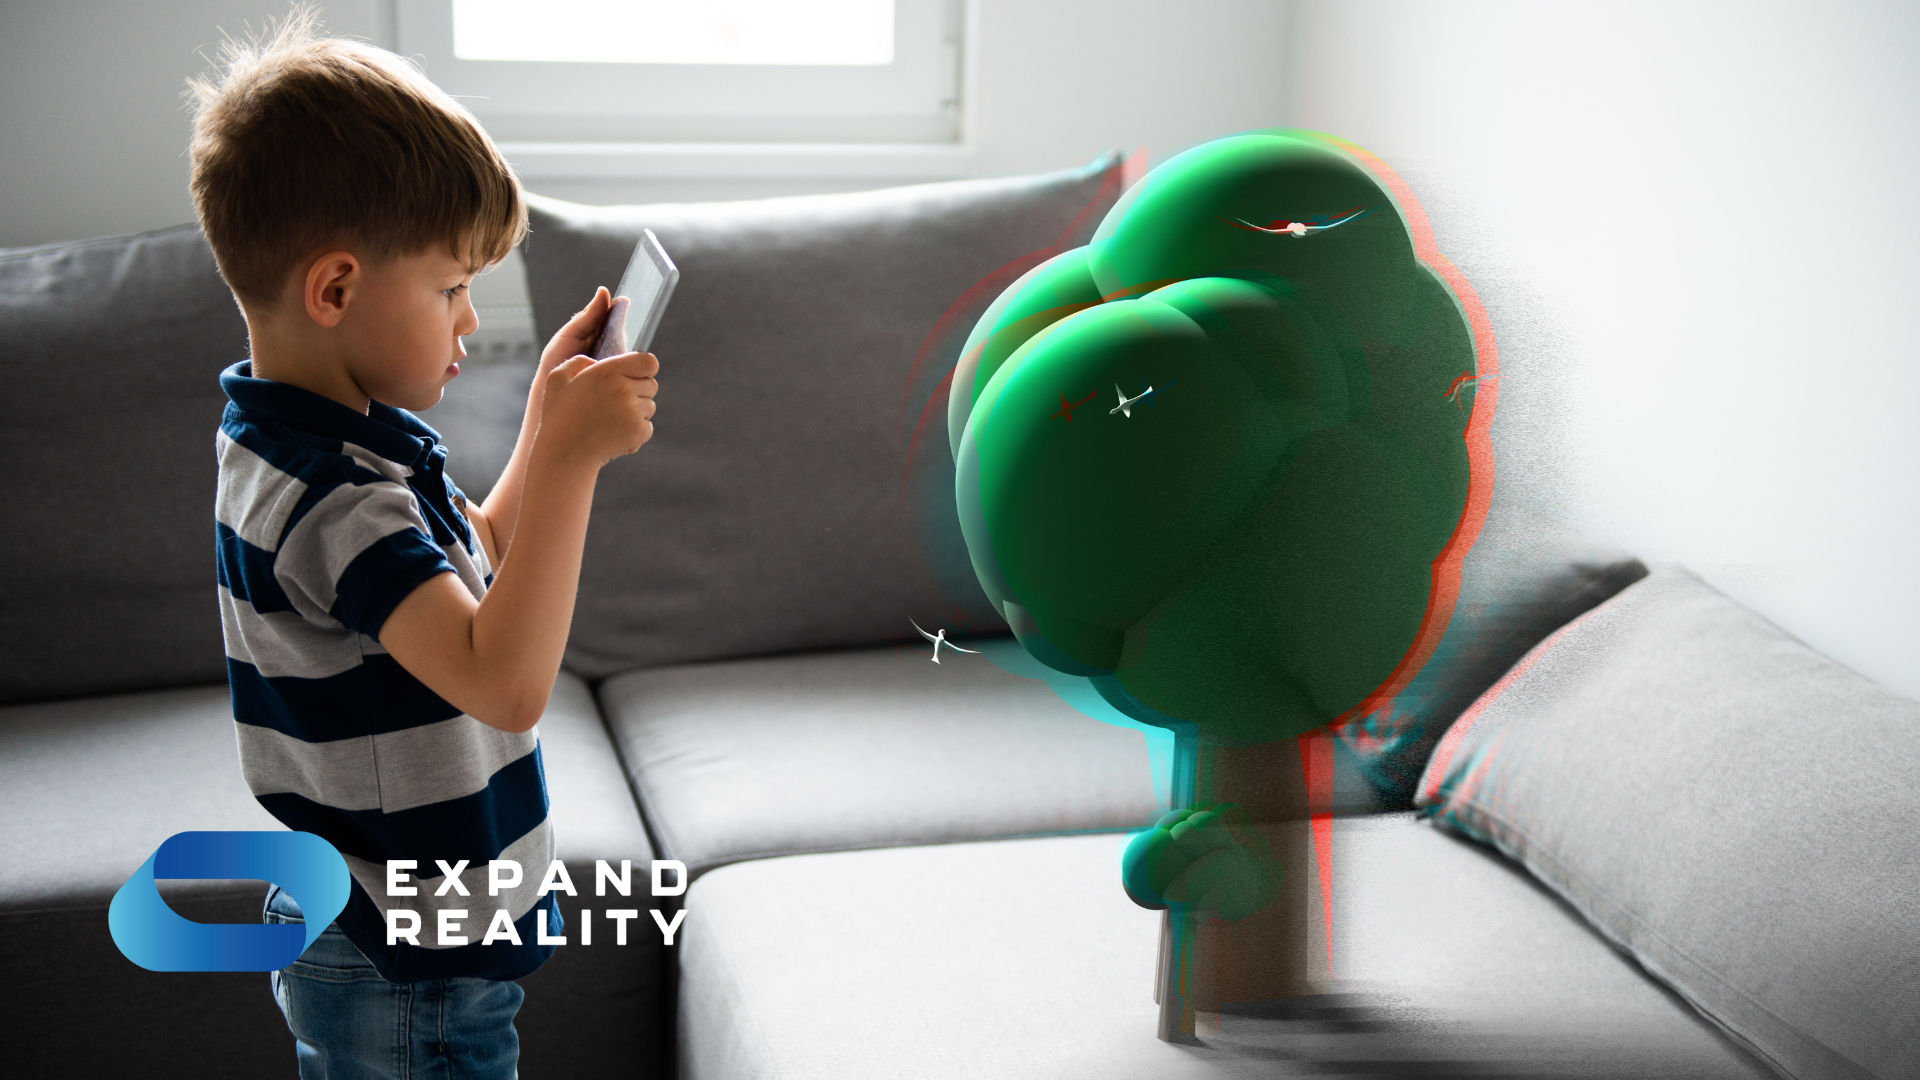 Looking to liven up the classroom? Explore the wide range of AR apps available and you can transform any class into an interactive world of adventure.